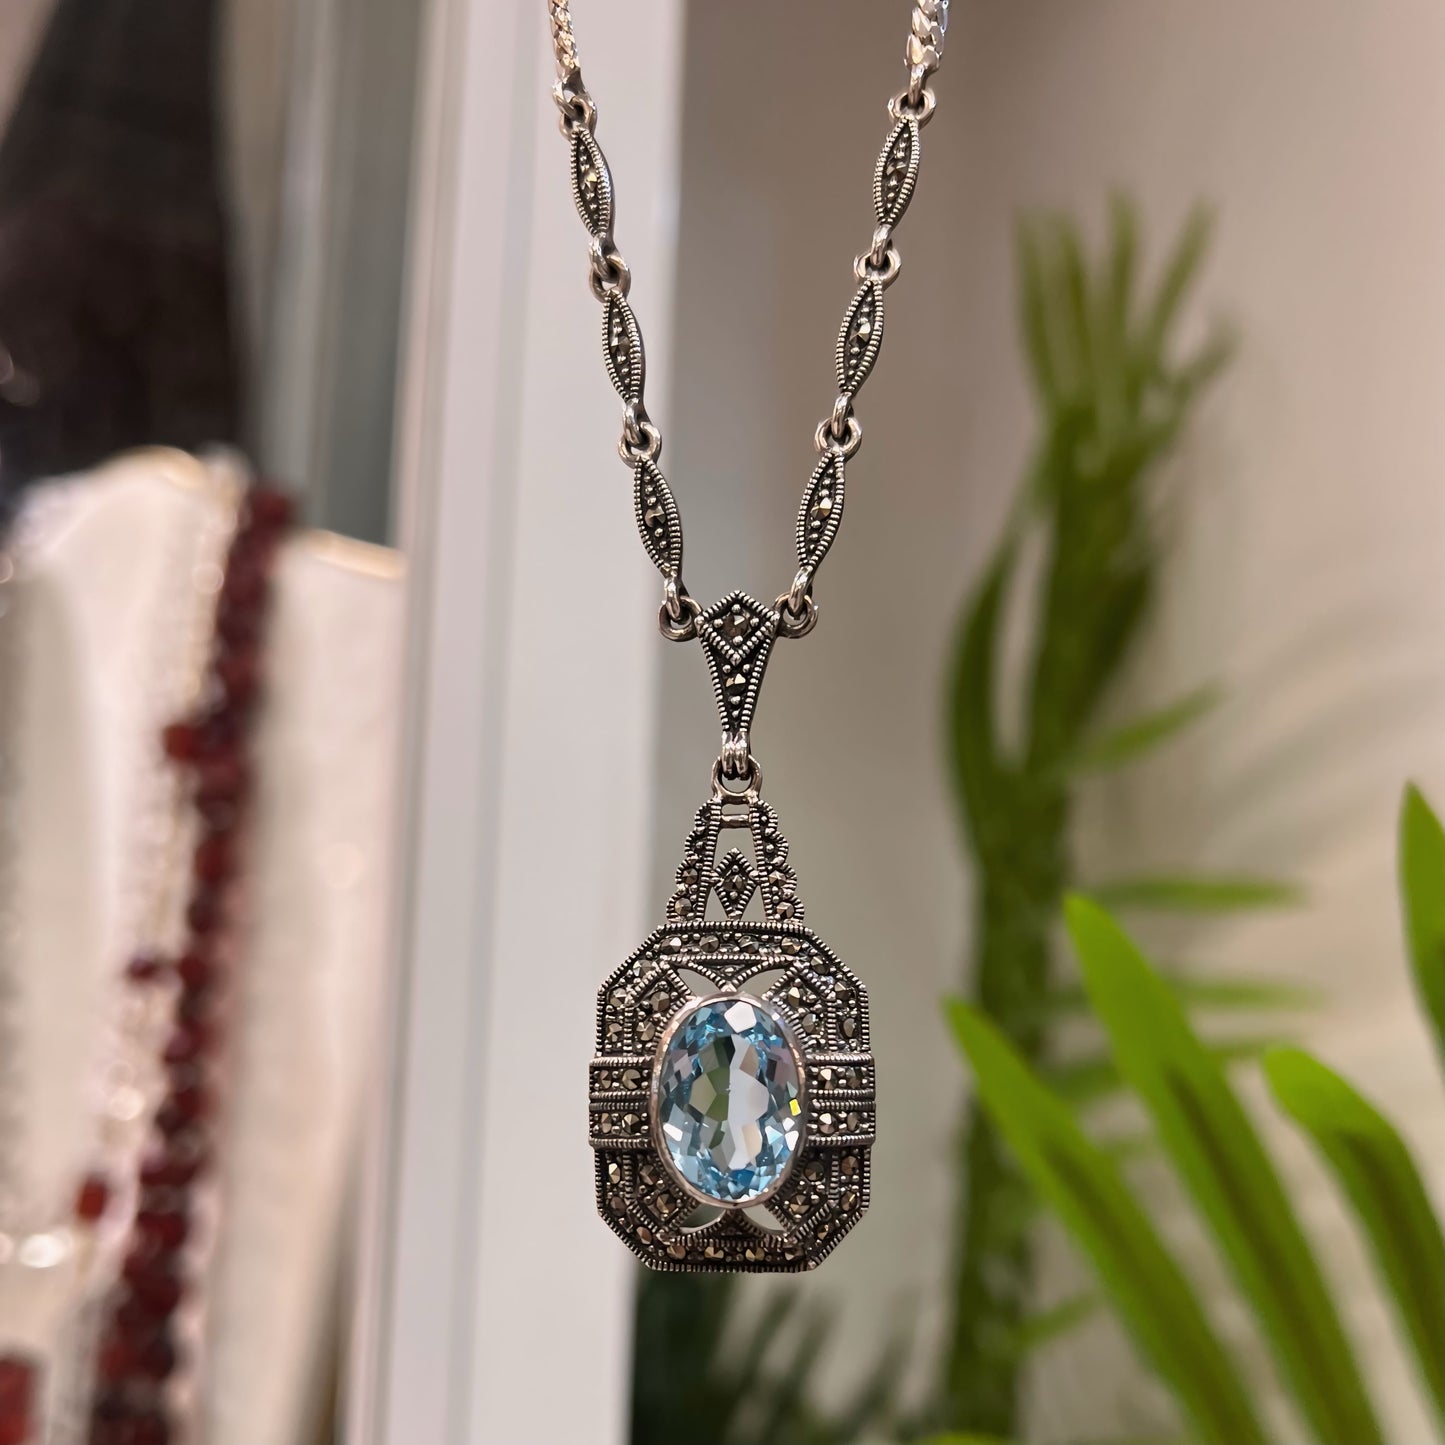 Art Deco Reproduction Sterling Silver Blue Topaz and Marcasite Necklace